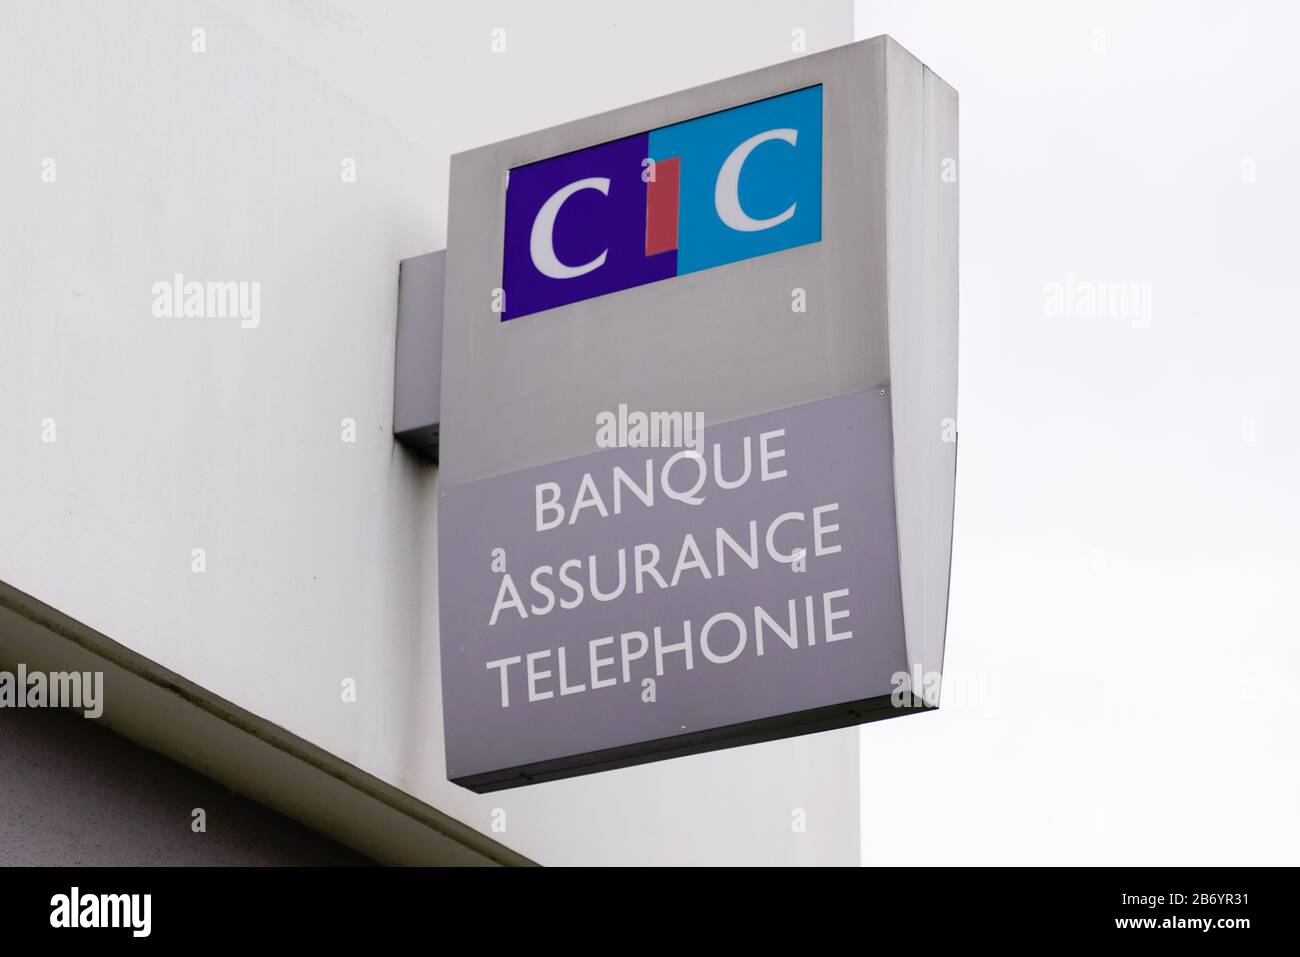 Bordeaux , Aquitaine / France - 11 18 2019 : CIC logo agency banking  insurance telephony store bank office french Credit Industriel et  Commercial Stock Photo - Alamy